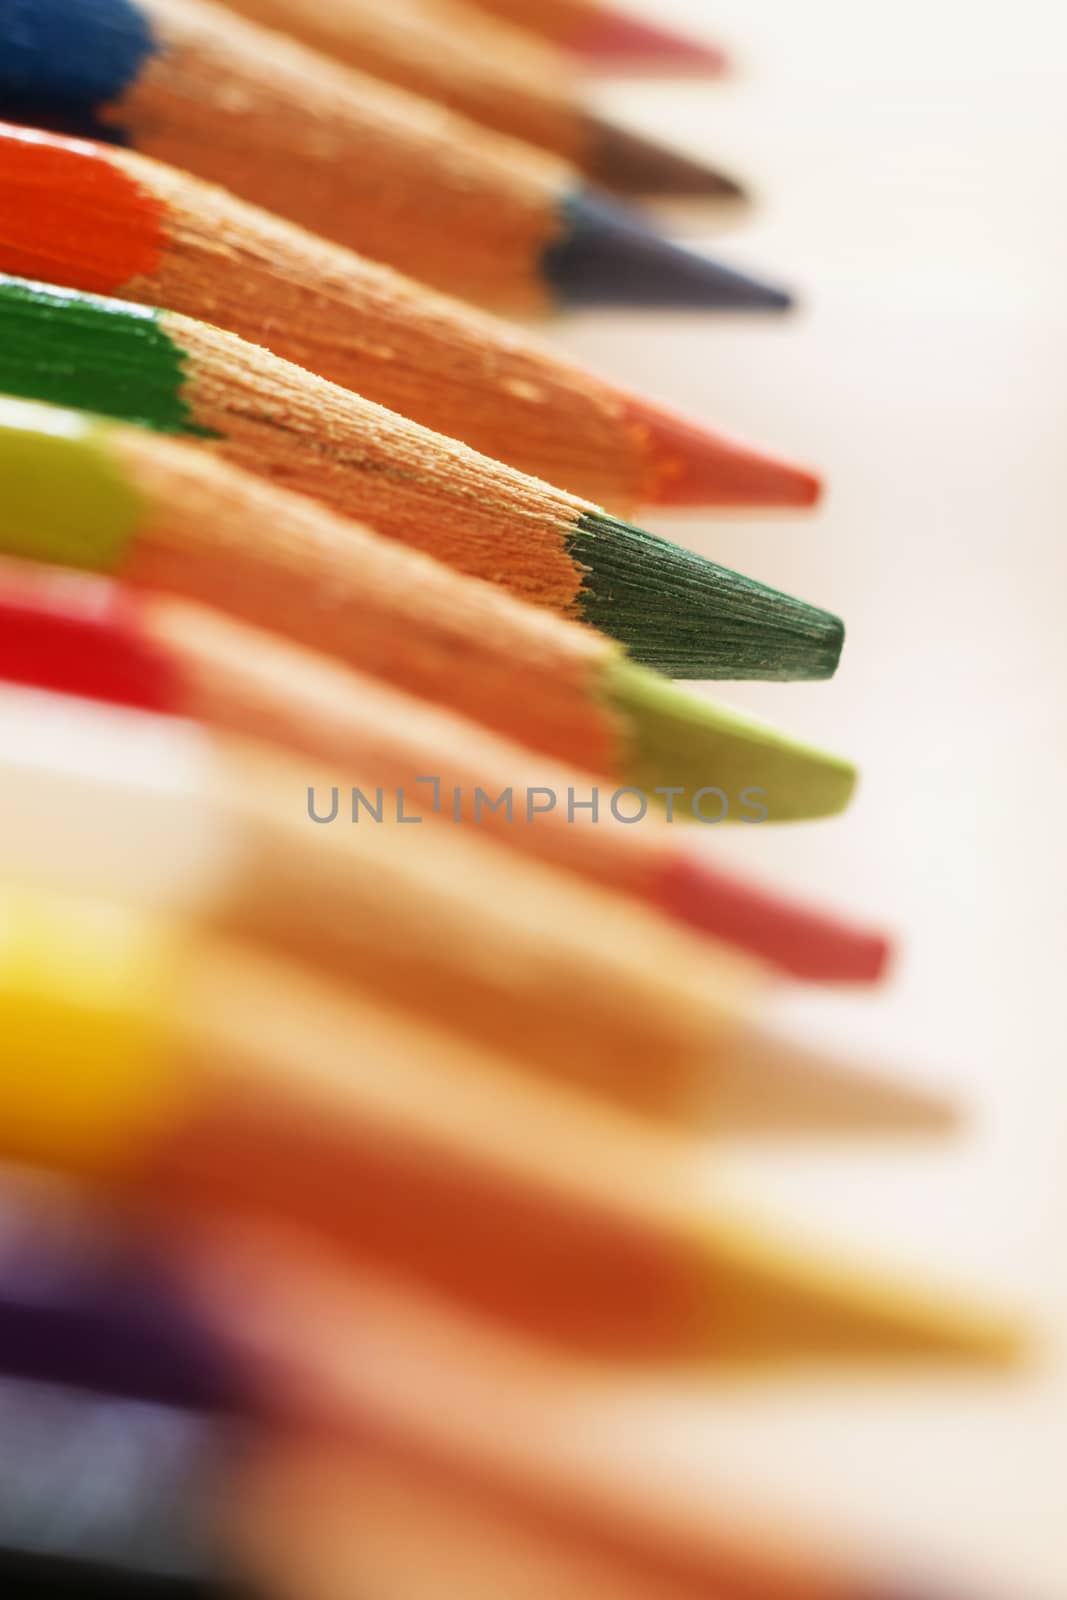 Colored pencils on a white background by victimewalker